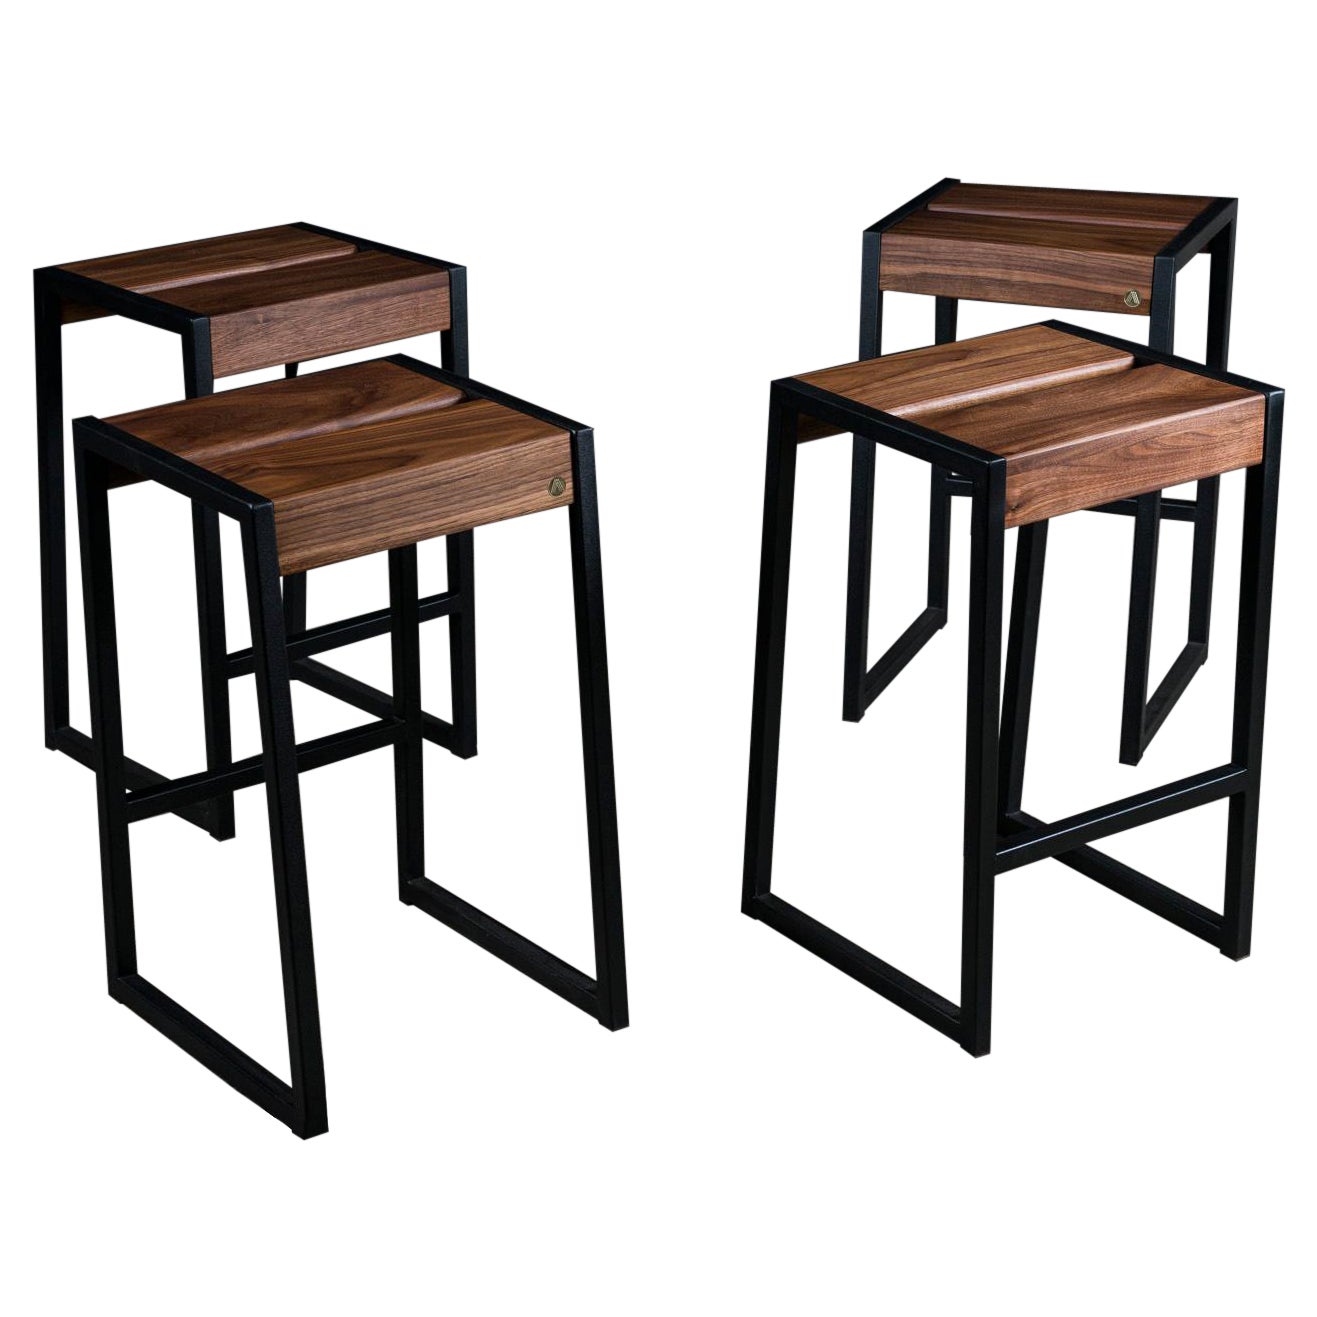 4x Liverpool Modern Backless Stools, by AMBROZIA, Solid Walnut & Black Steel For Sale